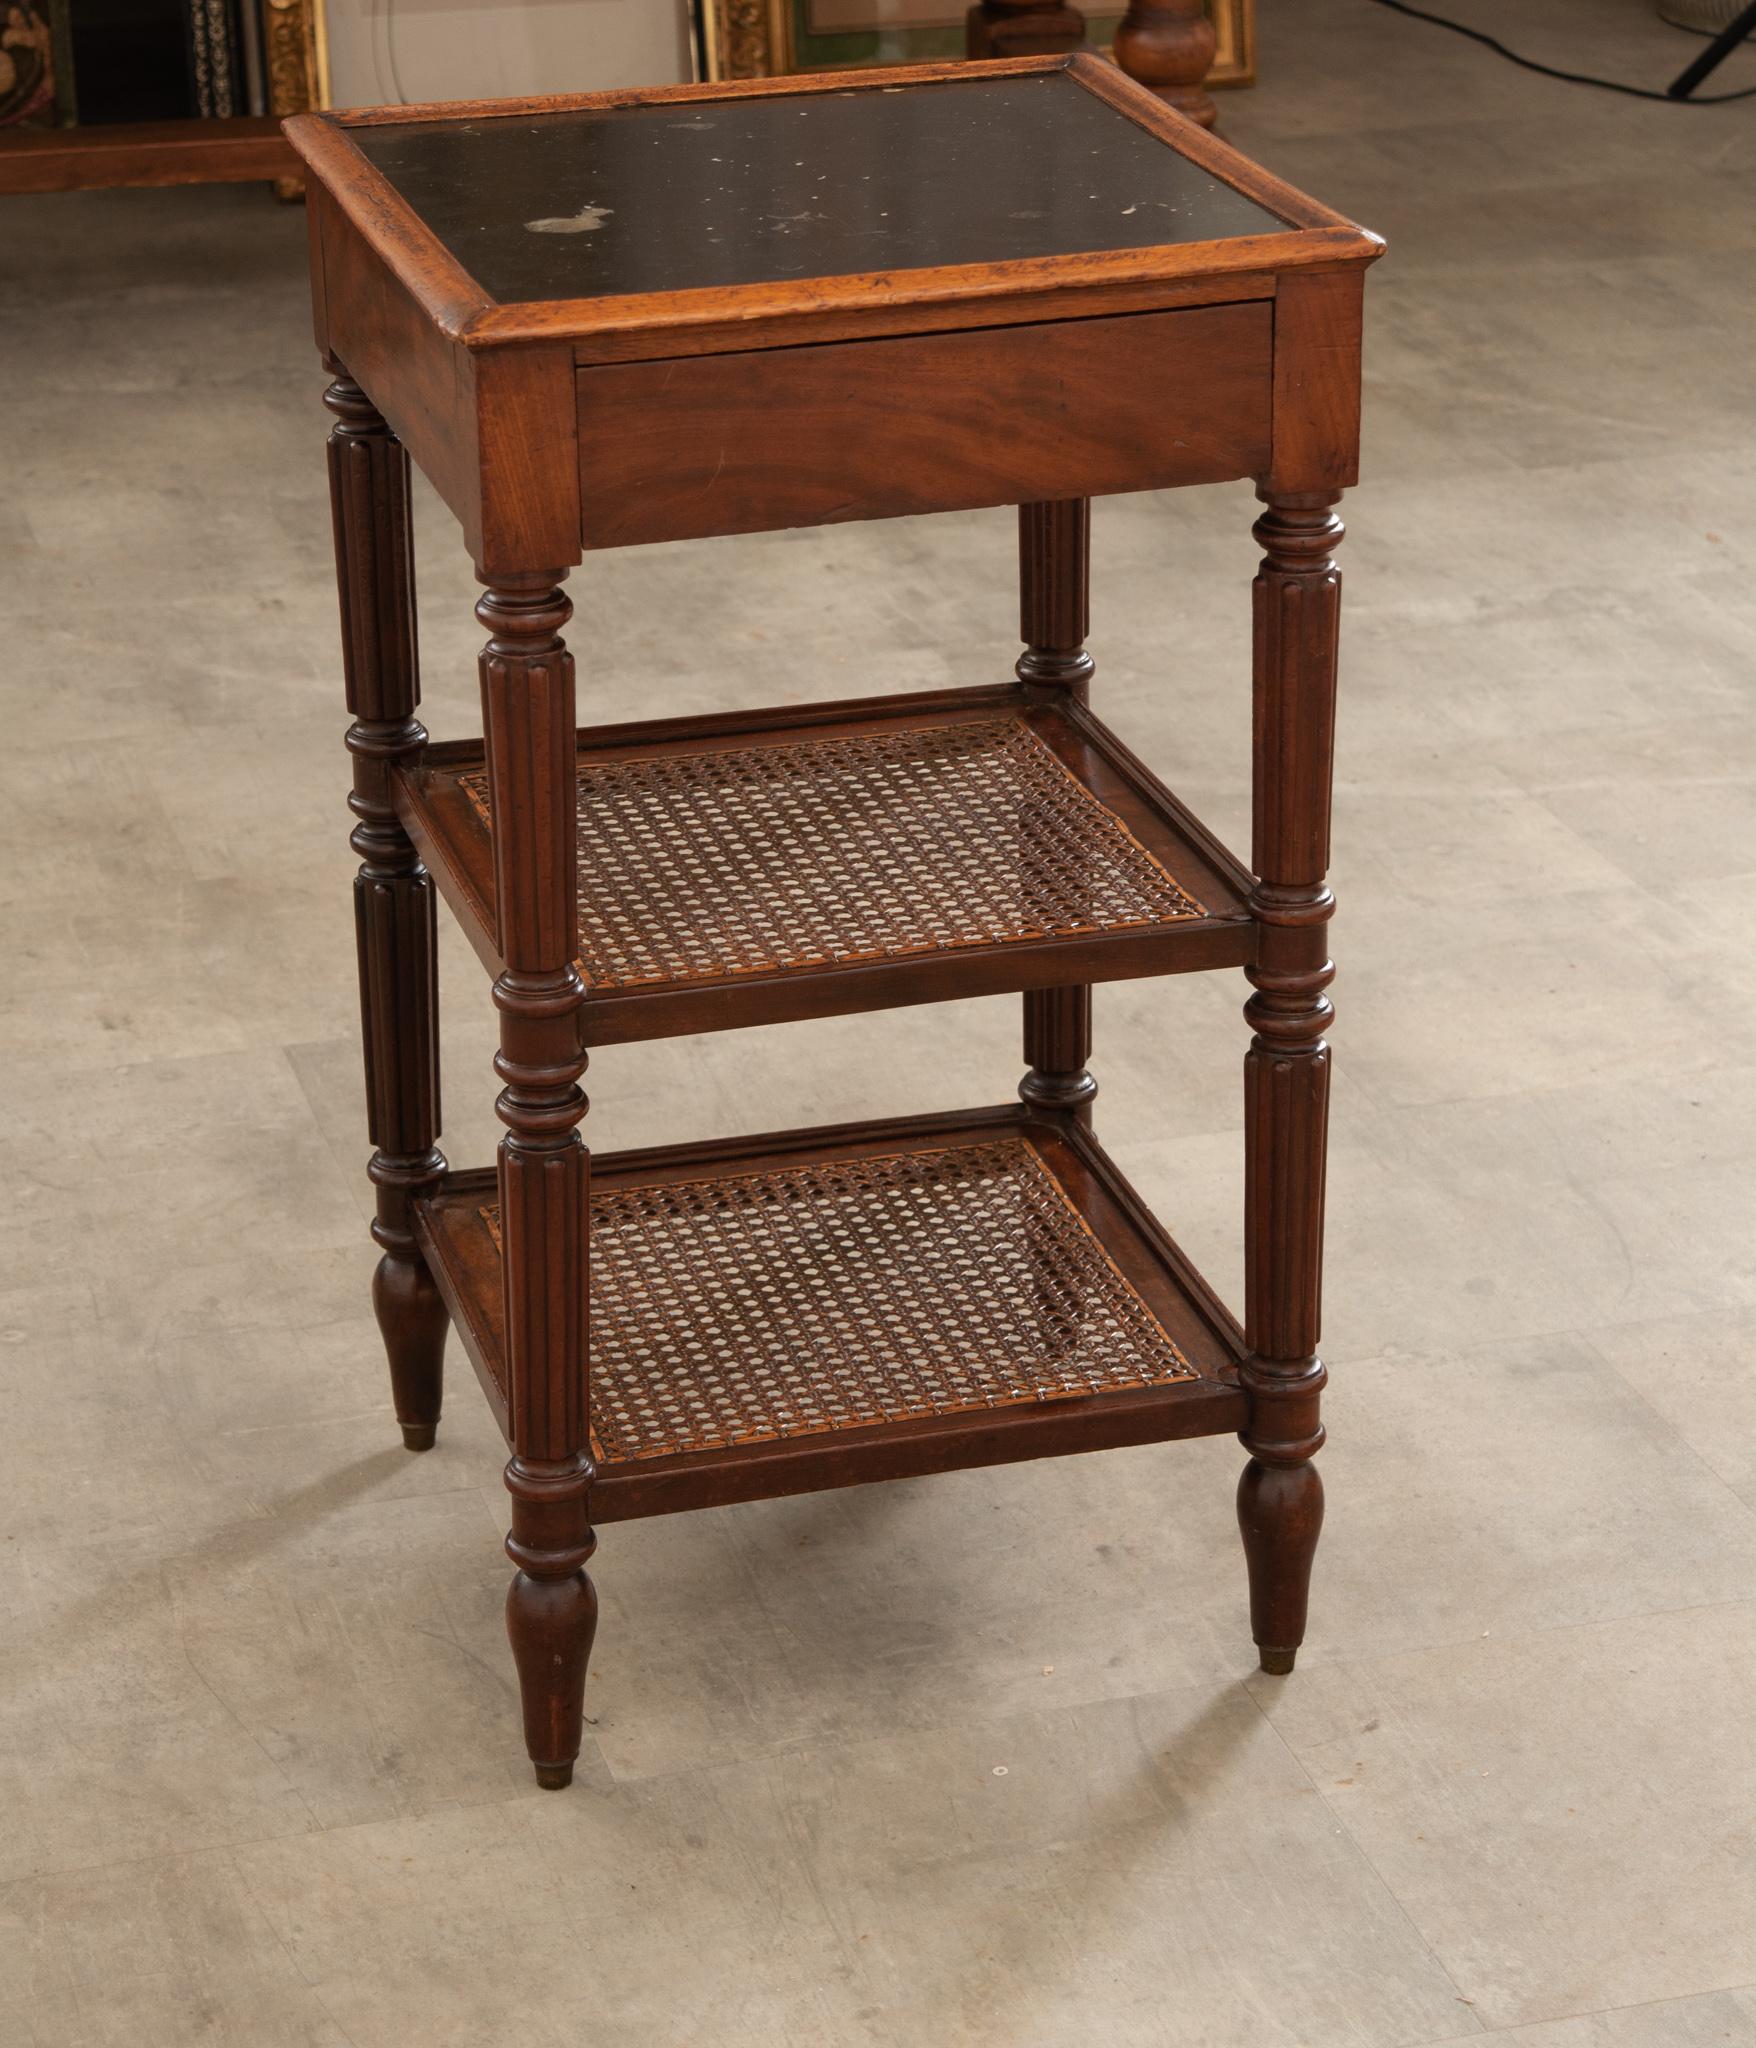 An elegant 19th century French etagere hand-crafted in Burgundy circa 1870. Built of fine walnut, this square table stands on finely turned and fluted baluster legs ending with arrow feet. Connected at the base are two cane shelves over a straight